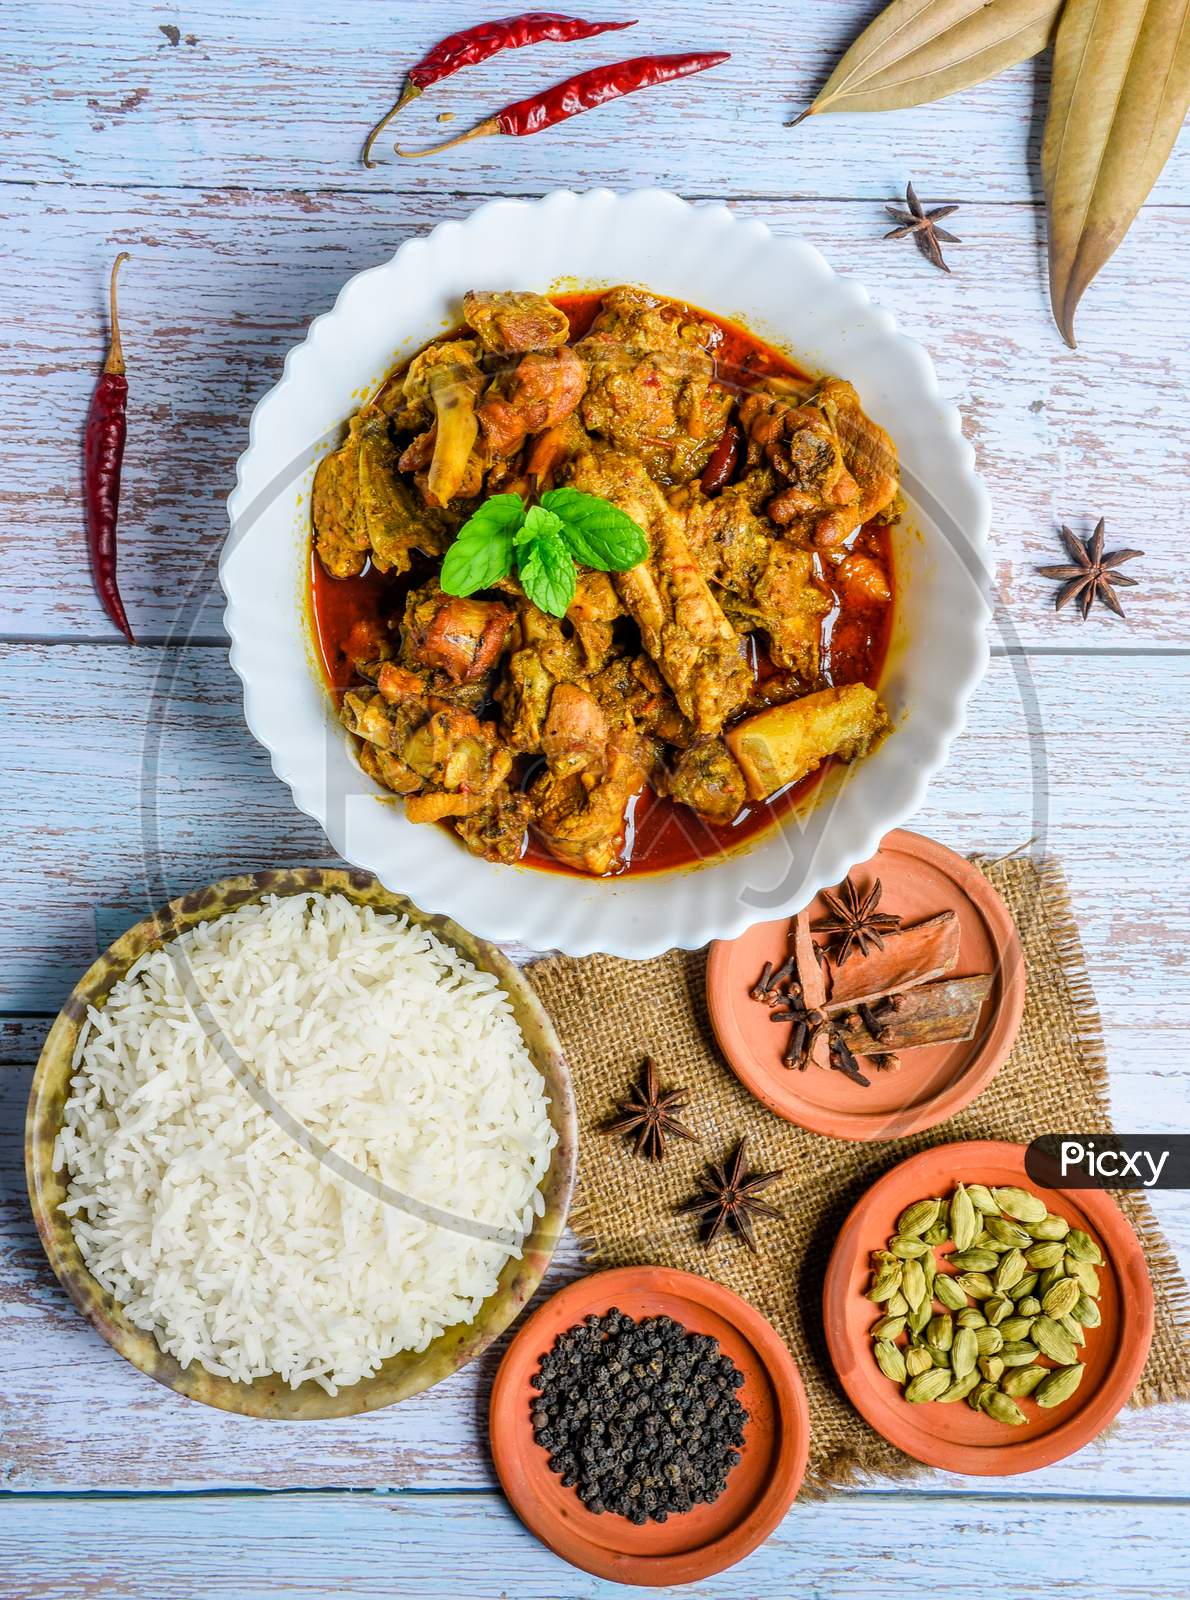 Chicken curry or masala , spicy reddish chicken leg piece dish garnished with coriander leaf and arranged in a white ceramic bowl with wooden background